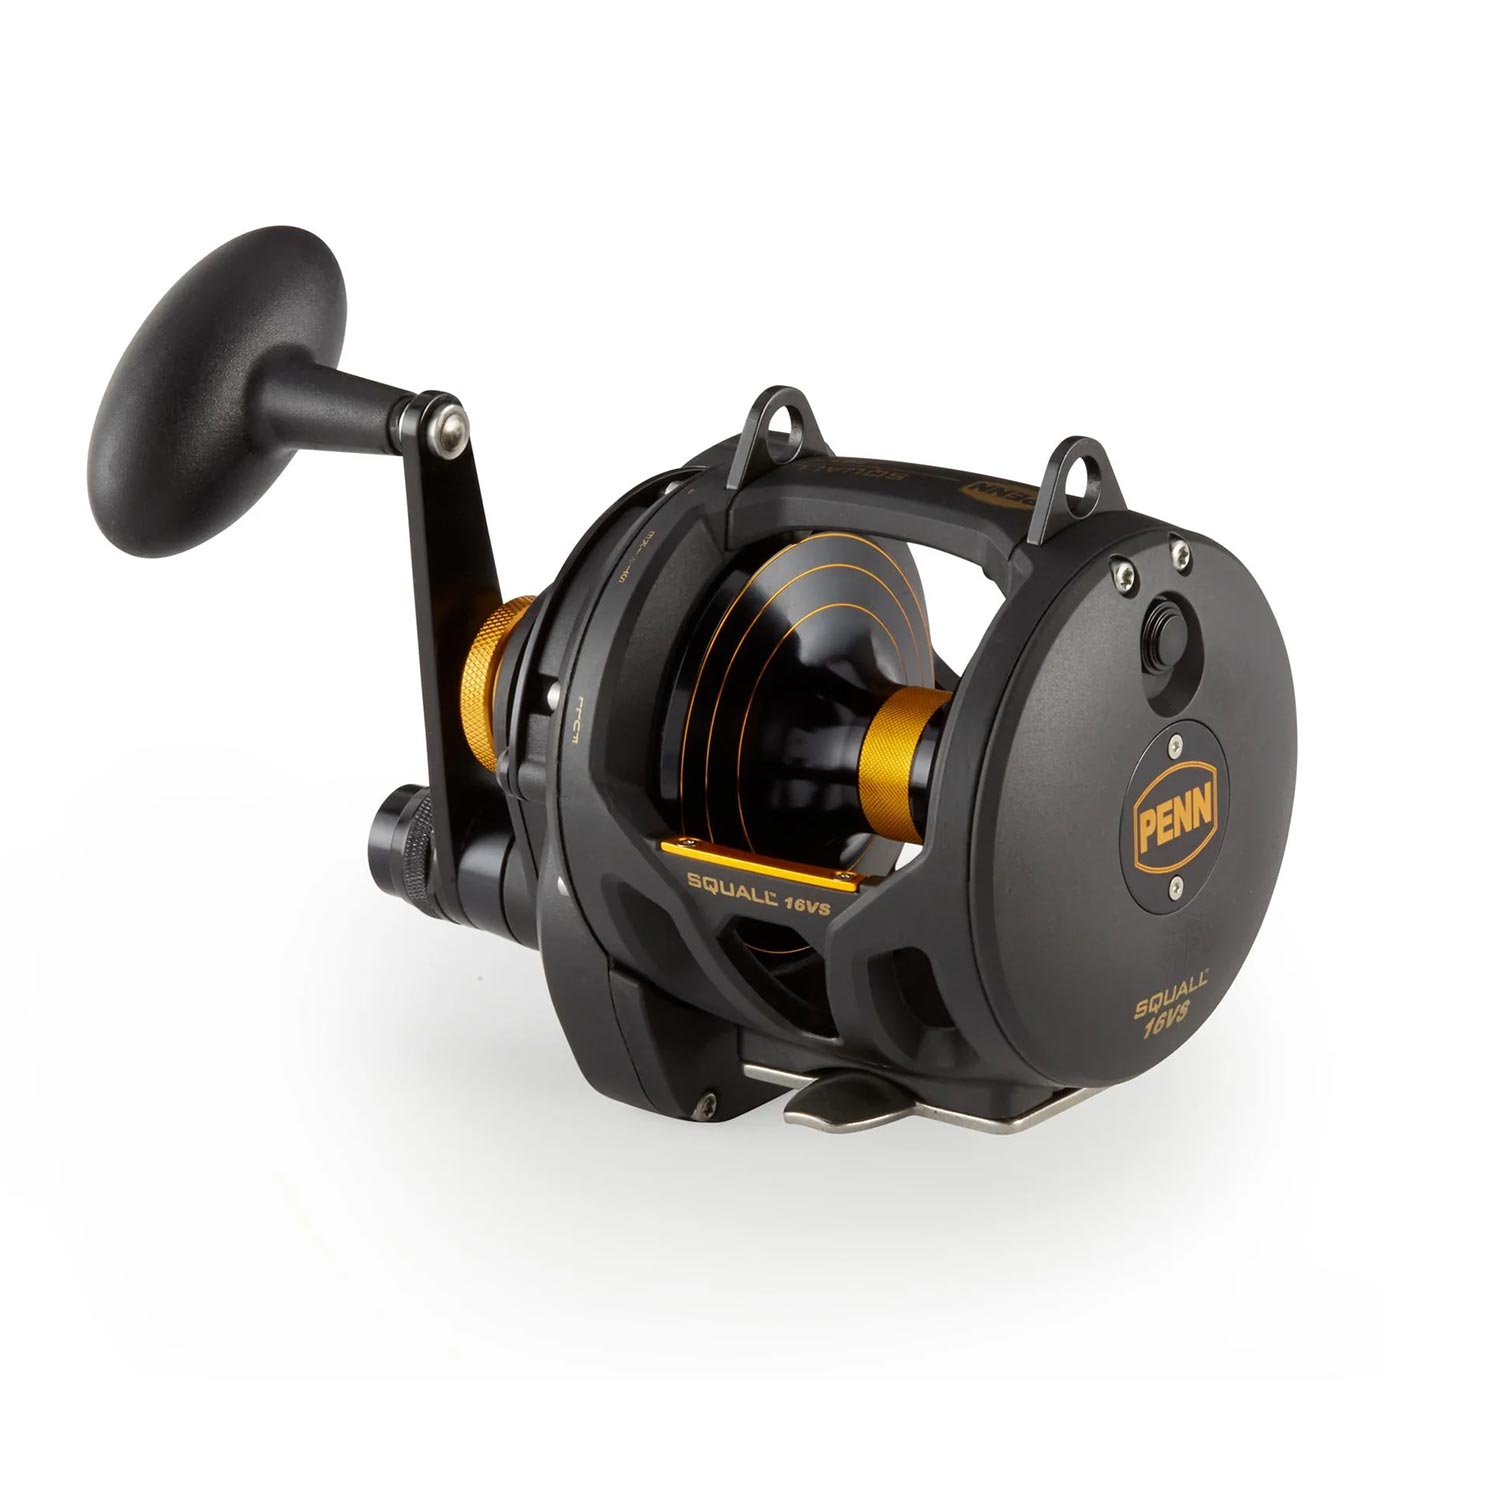 Squall 2-Speed Lever Drag Conventional Reels